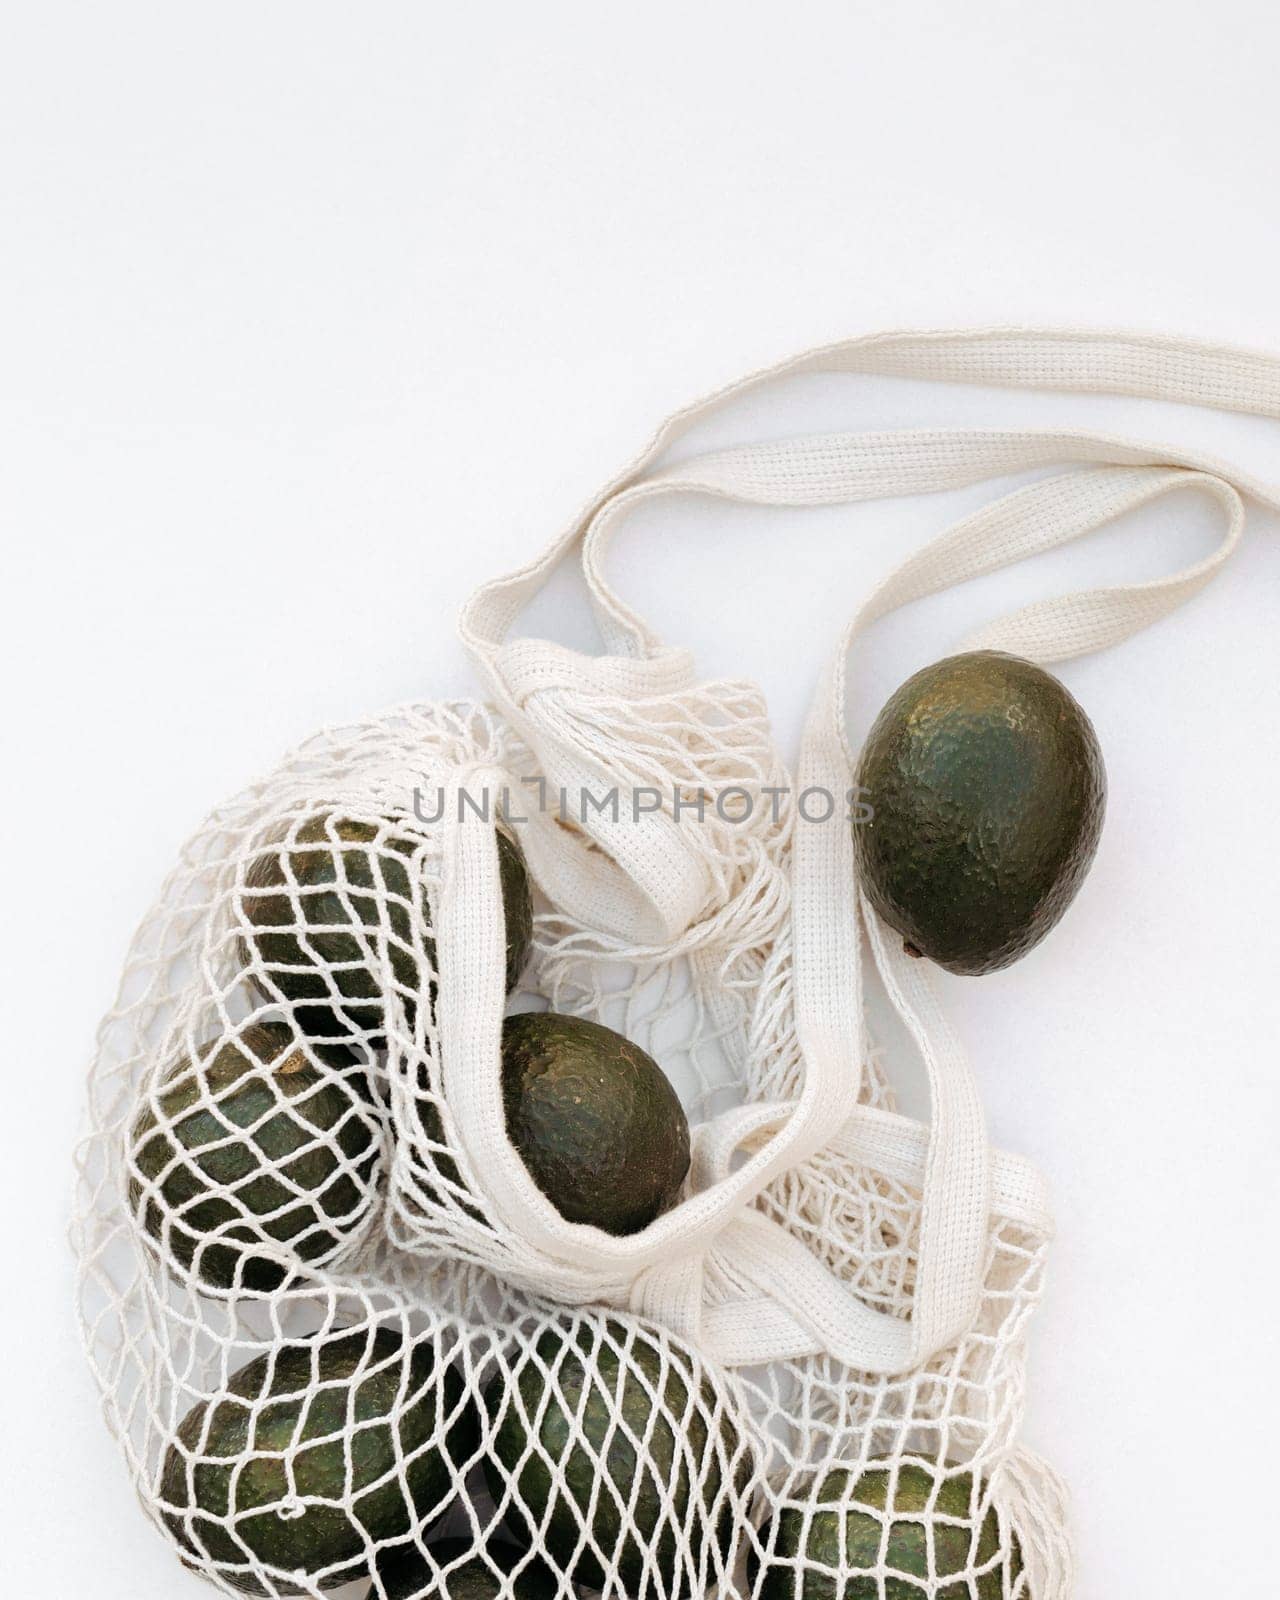 Avocados spilling from an eco-friendly net bag on a white background, concept of sustainable shopping